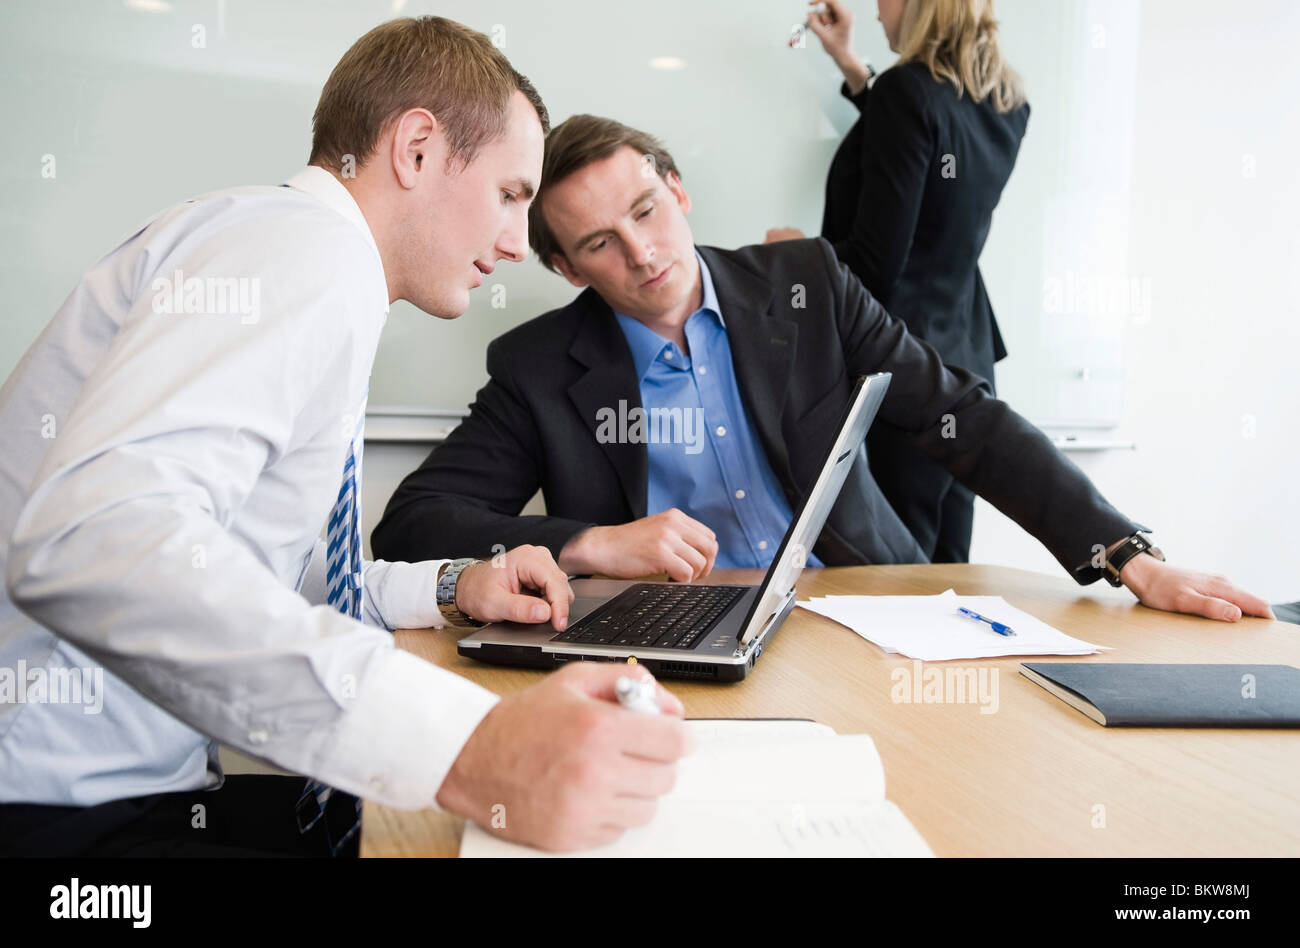 Two men and a woman in the conference room Stock Photo